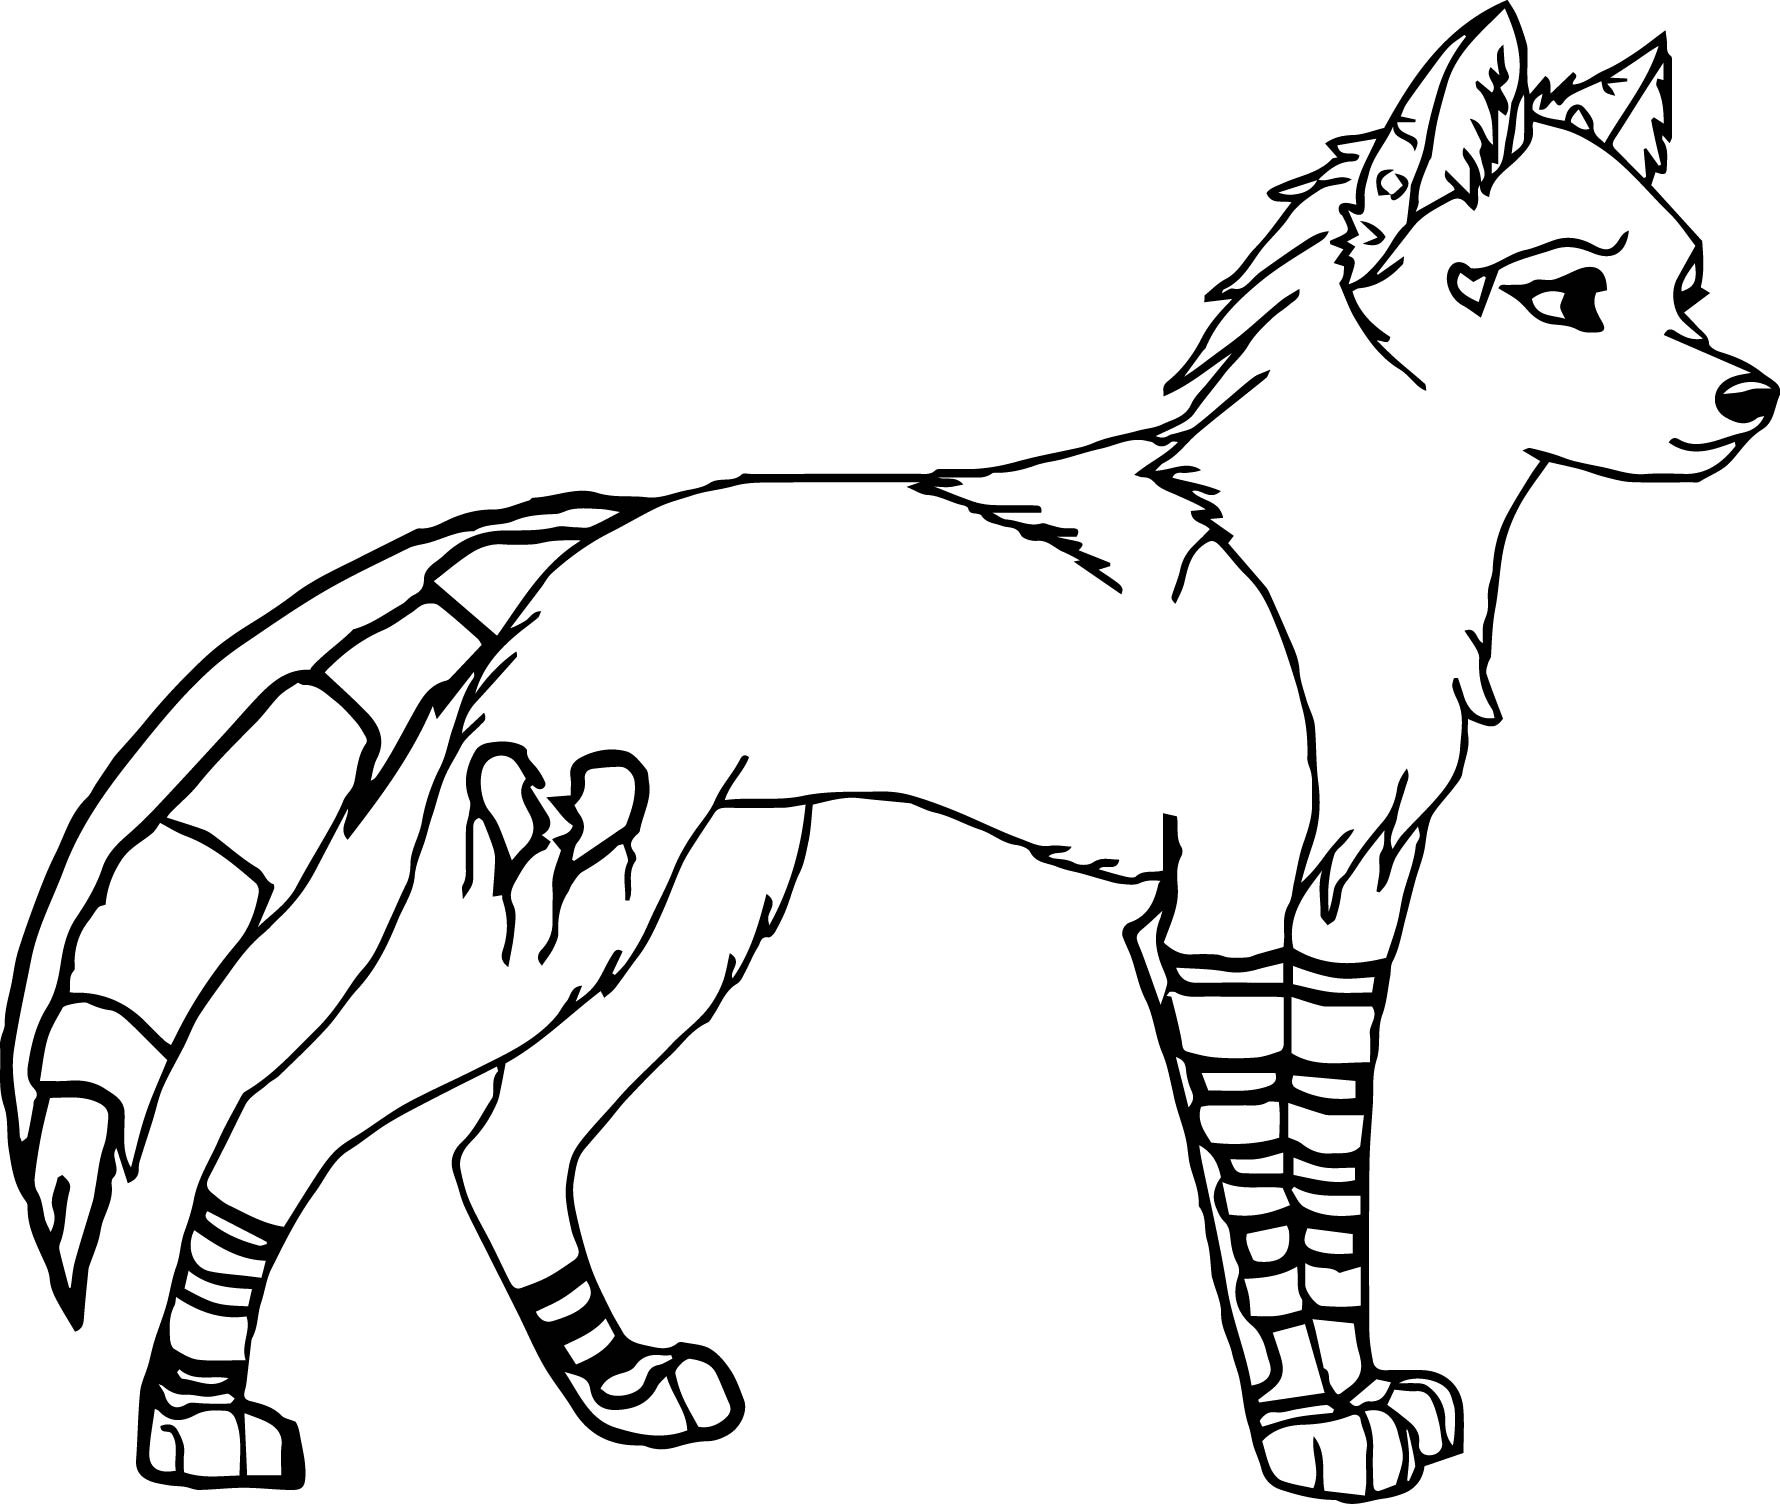 Anime Fox Coloring Pages at GetColorings.com | Free printable colorings